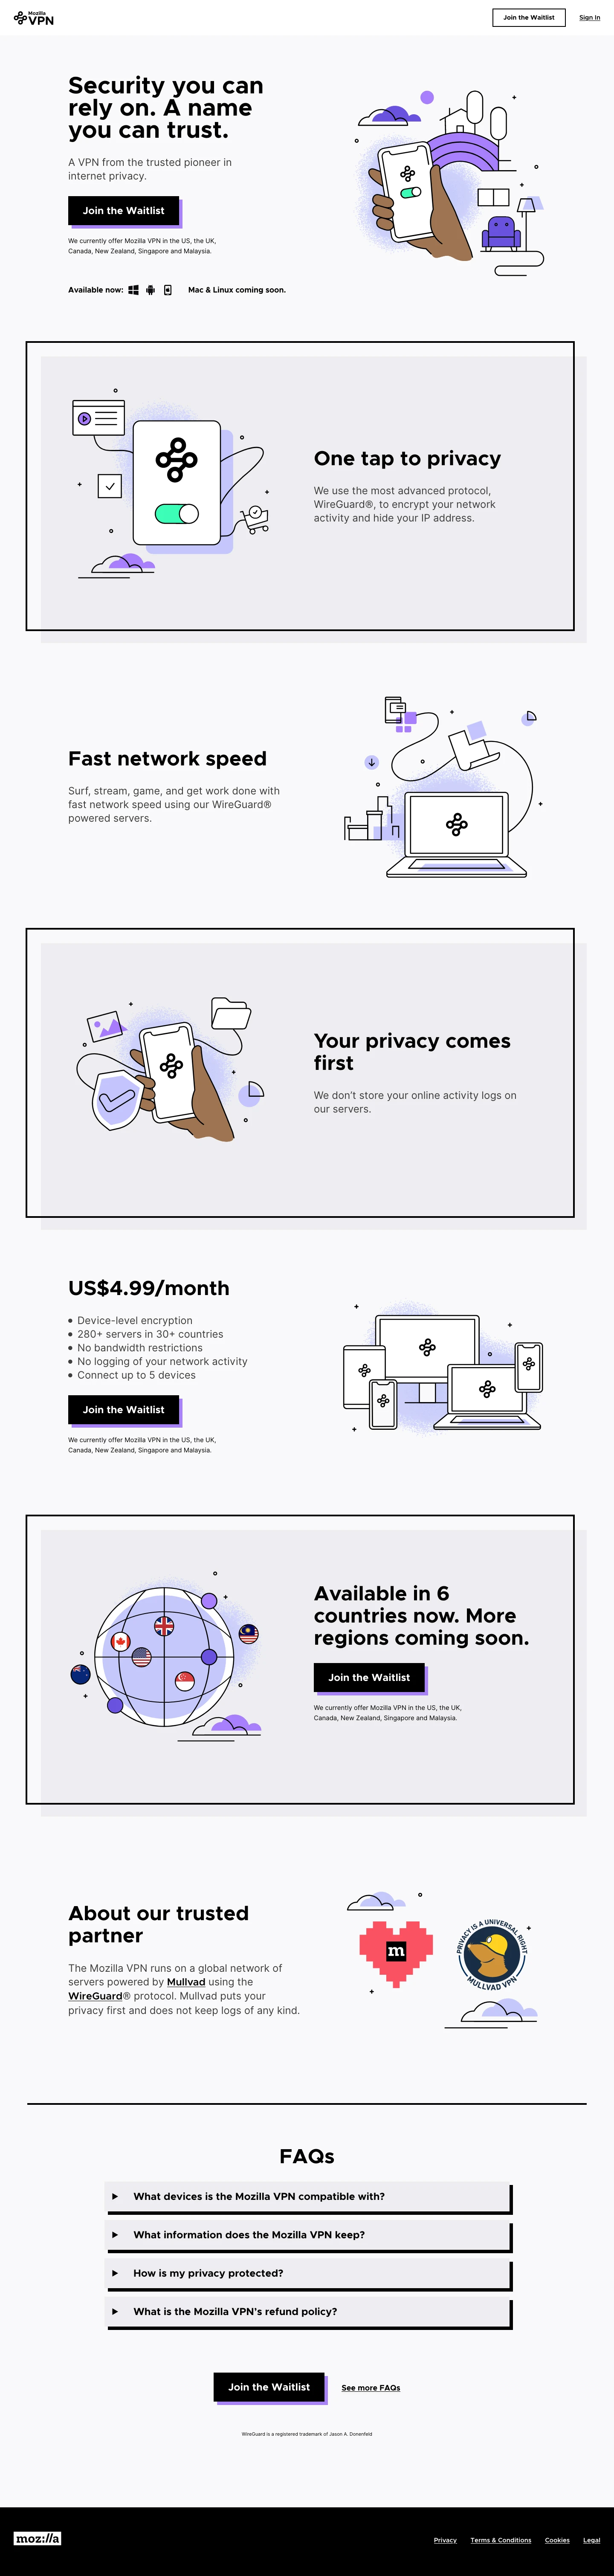 Mozilla VPN Landing Page Example: Use the Mozilla VPN for full-device protection for all apps. With servers in 30+ countries, you can connect to anywhere, from anywhere.